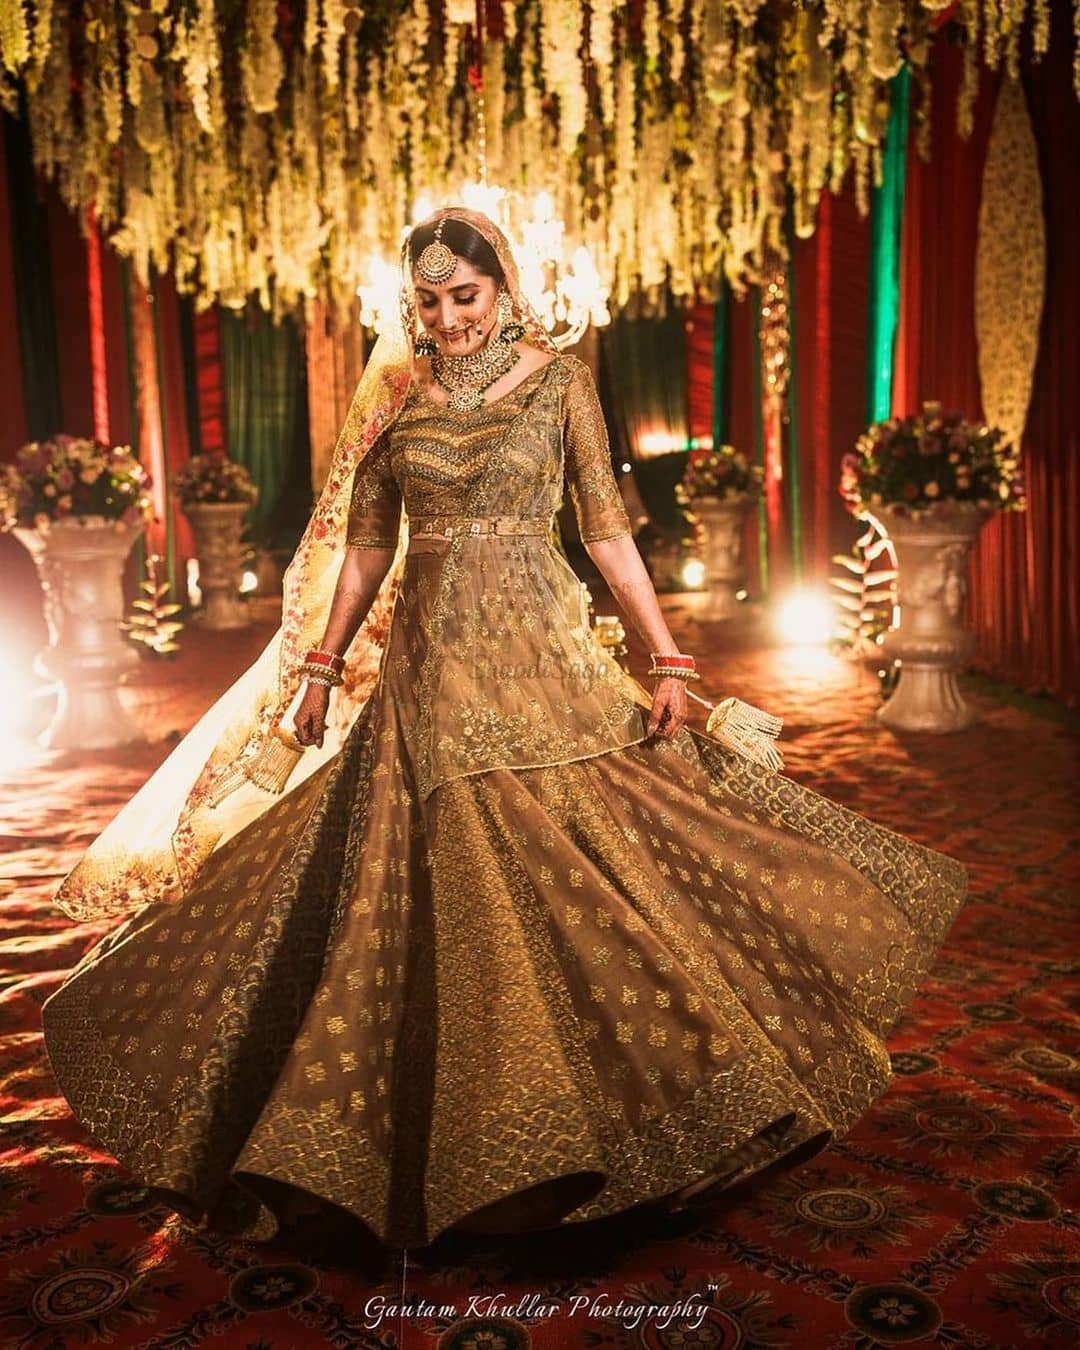 9 Unique Bridal Wear Ideas That You Can Flaunt At Your Reception